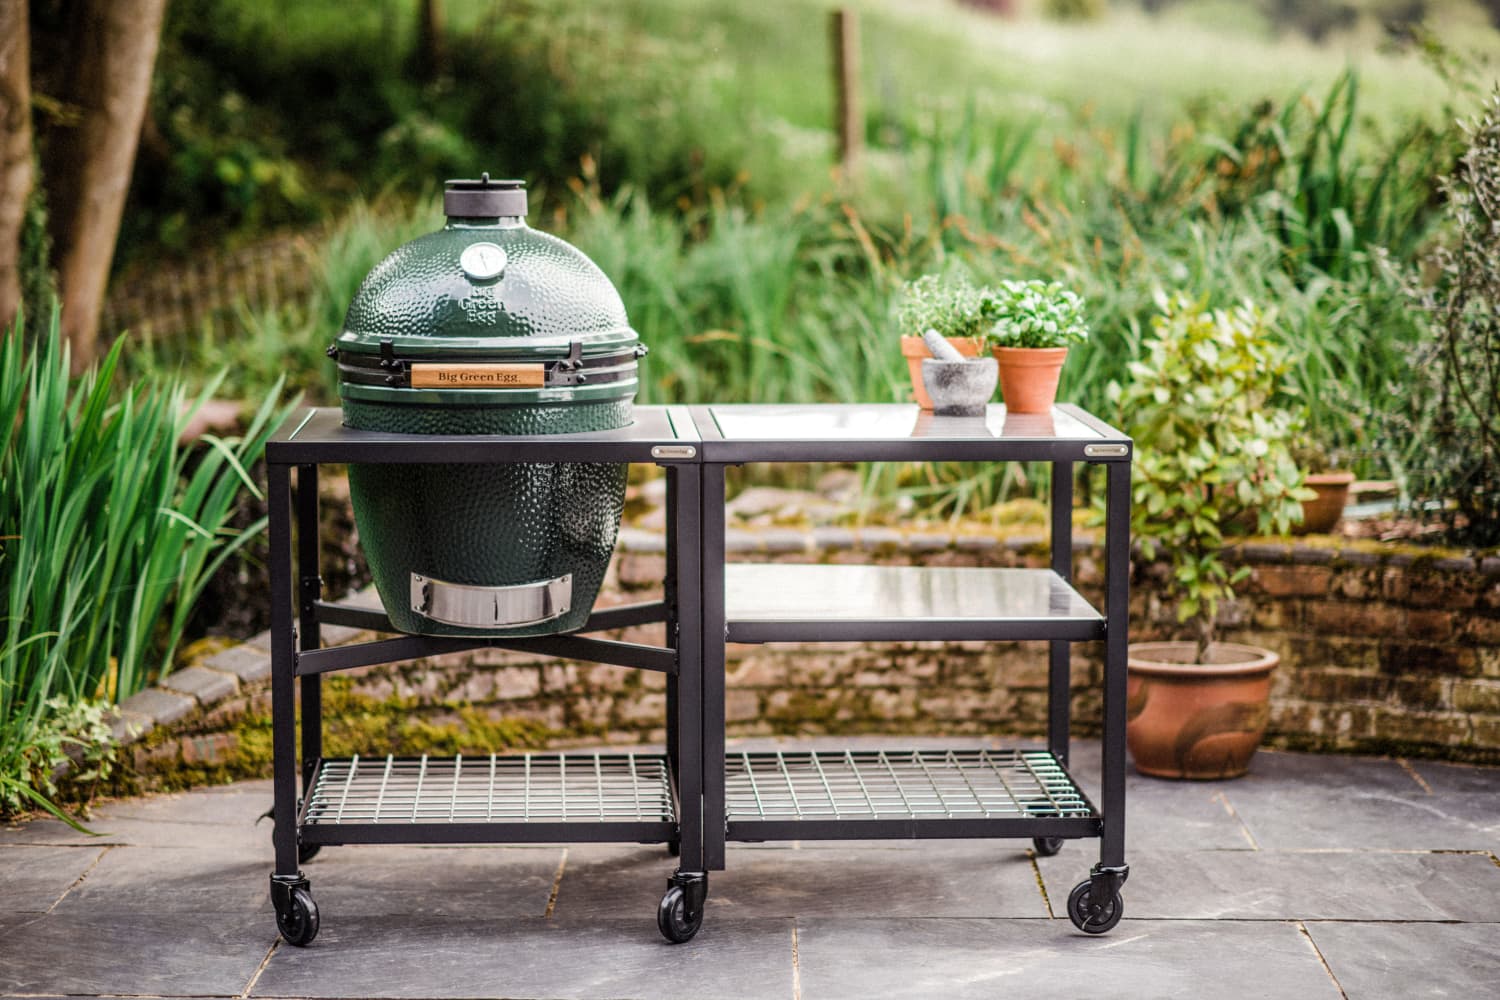 What's a Big Green Egg - and It the Money? | Kitchn